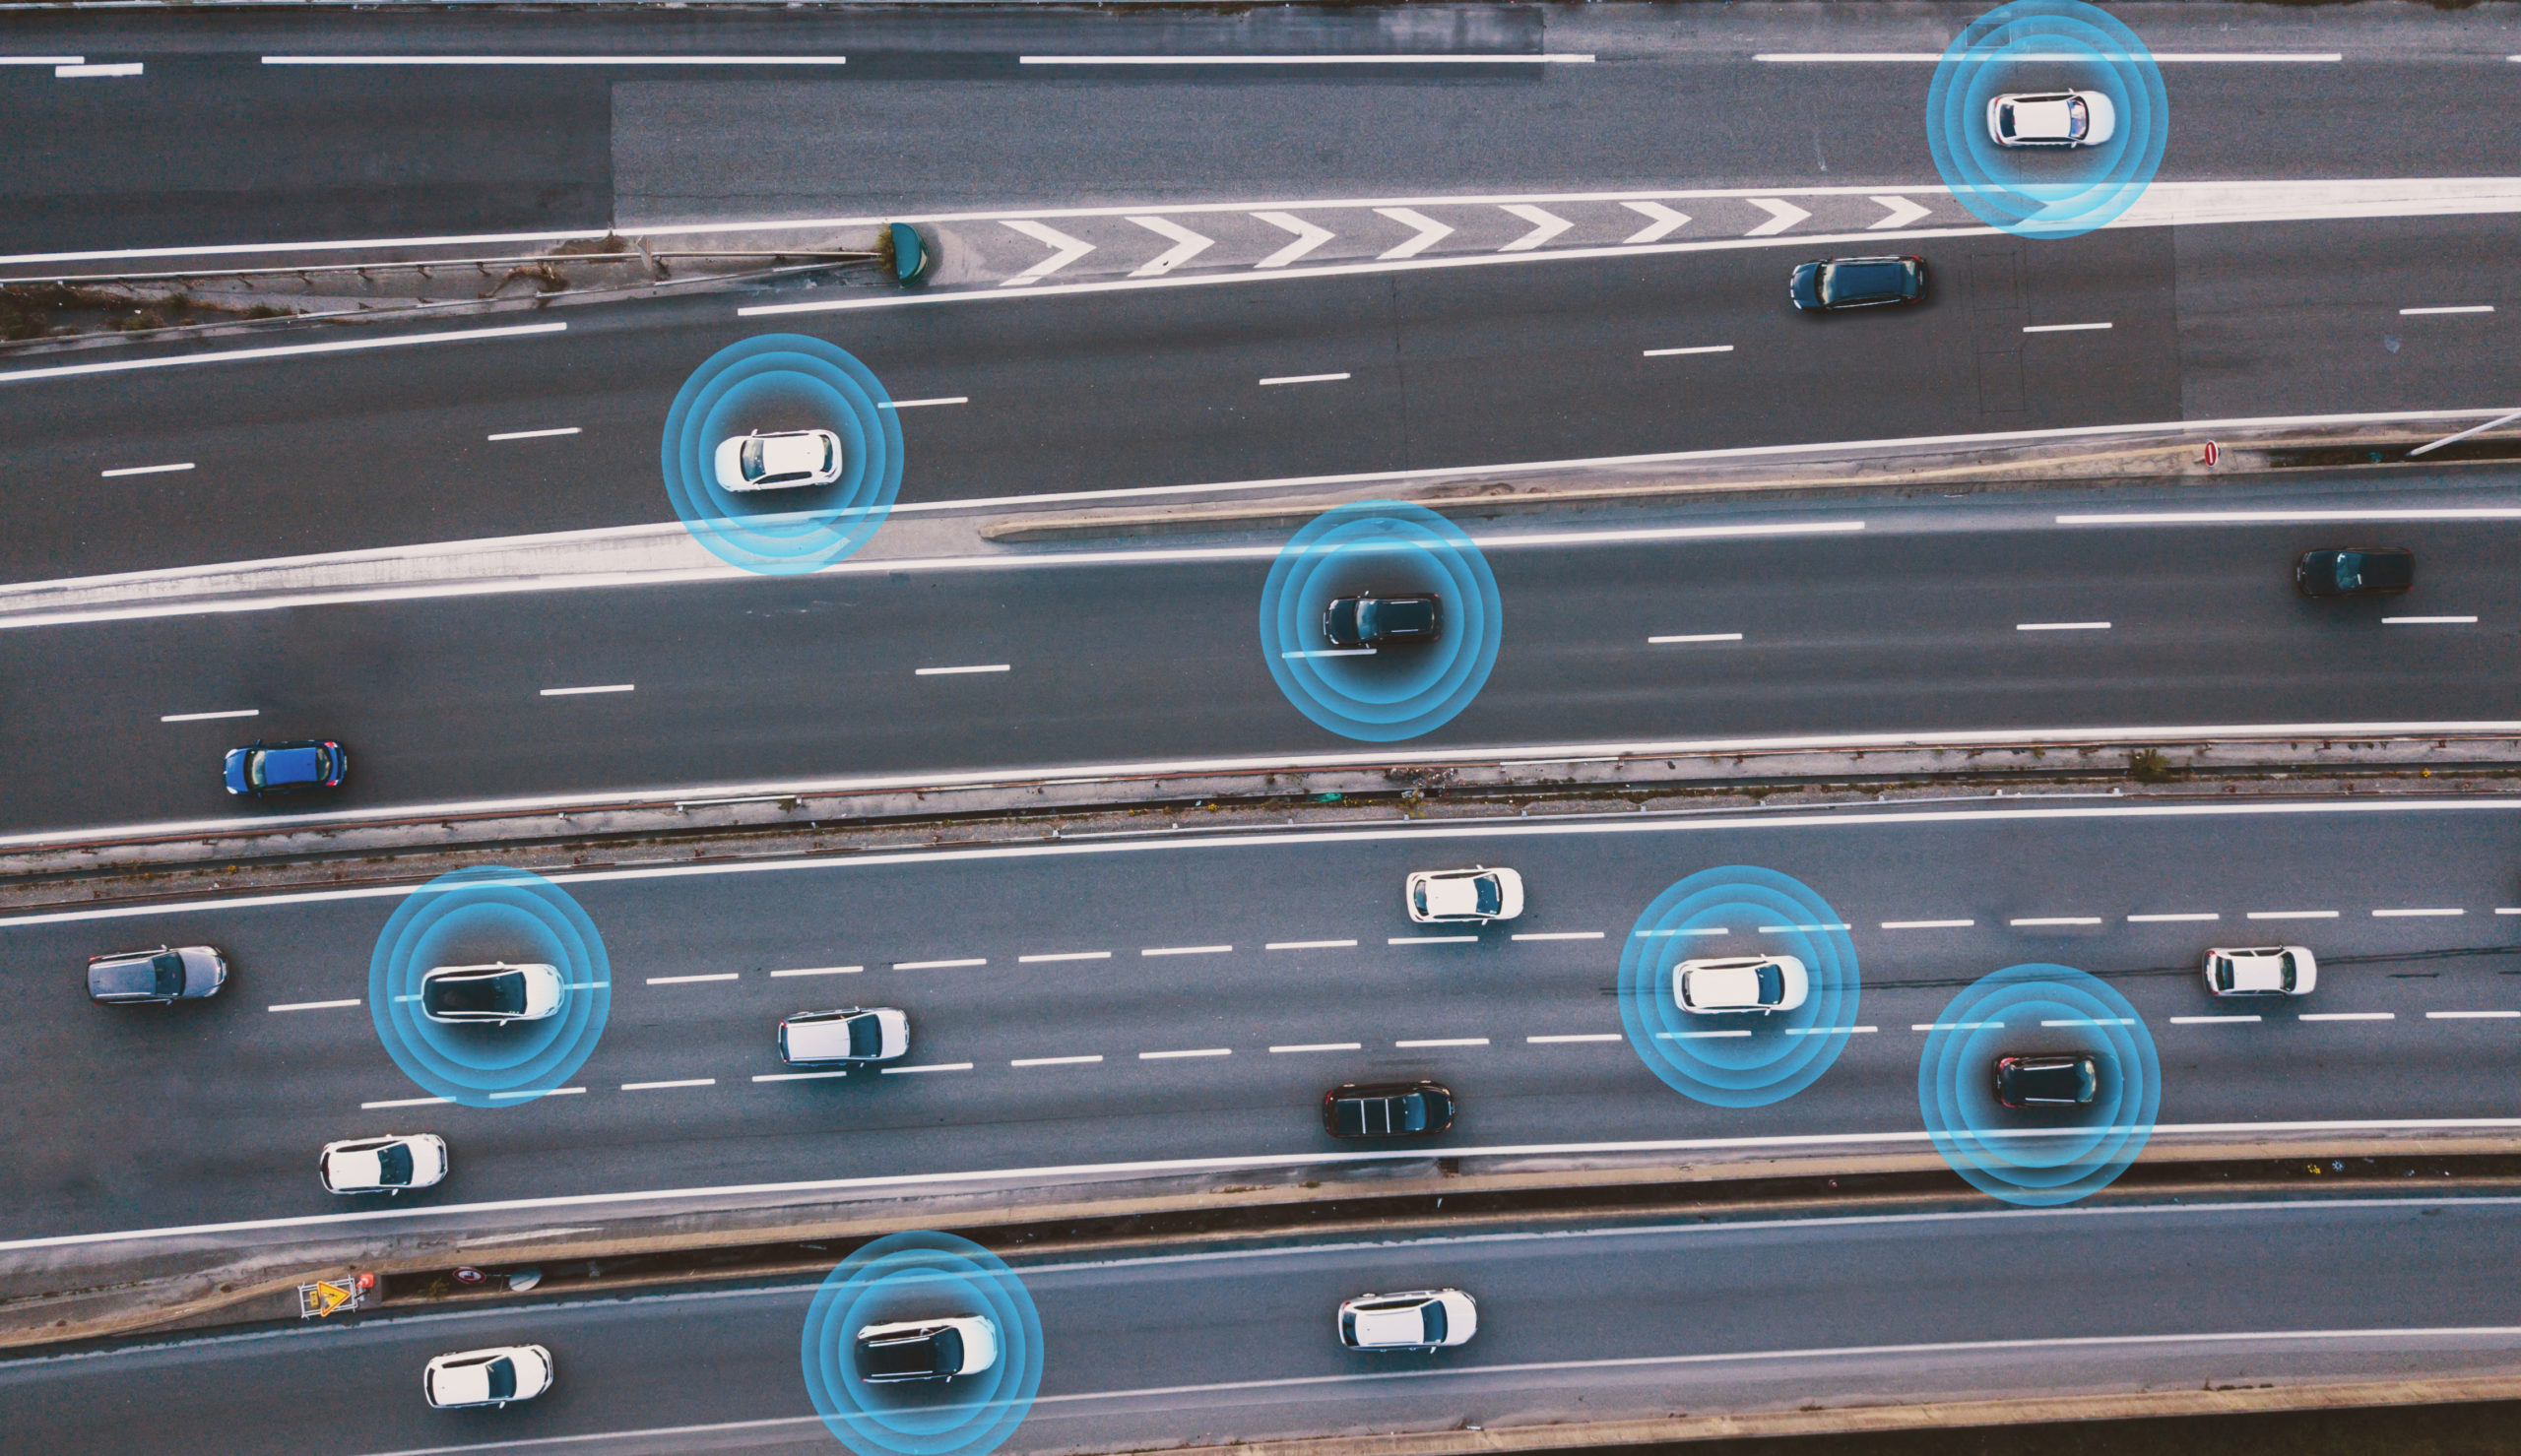 New white paper tells of untapped potential in connected vehicle data